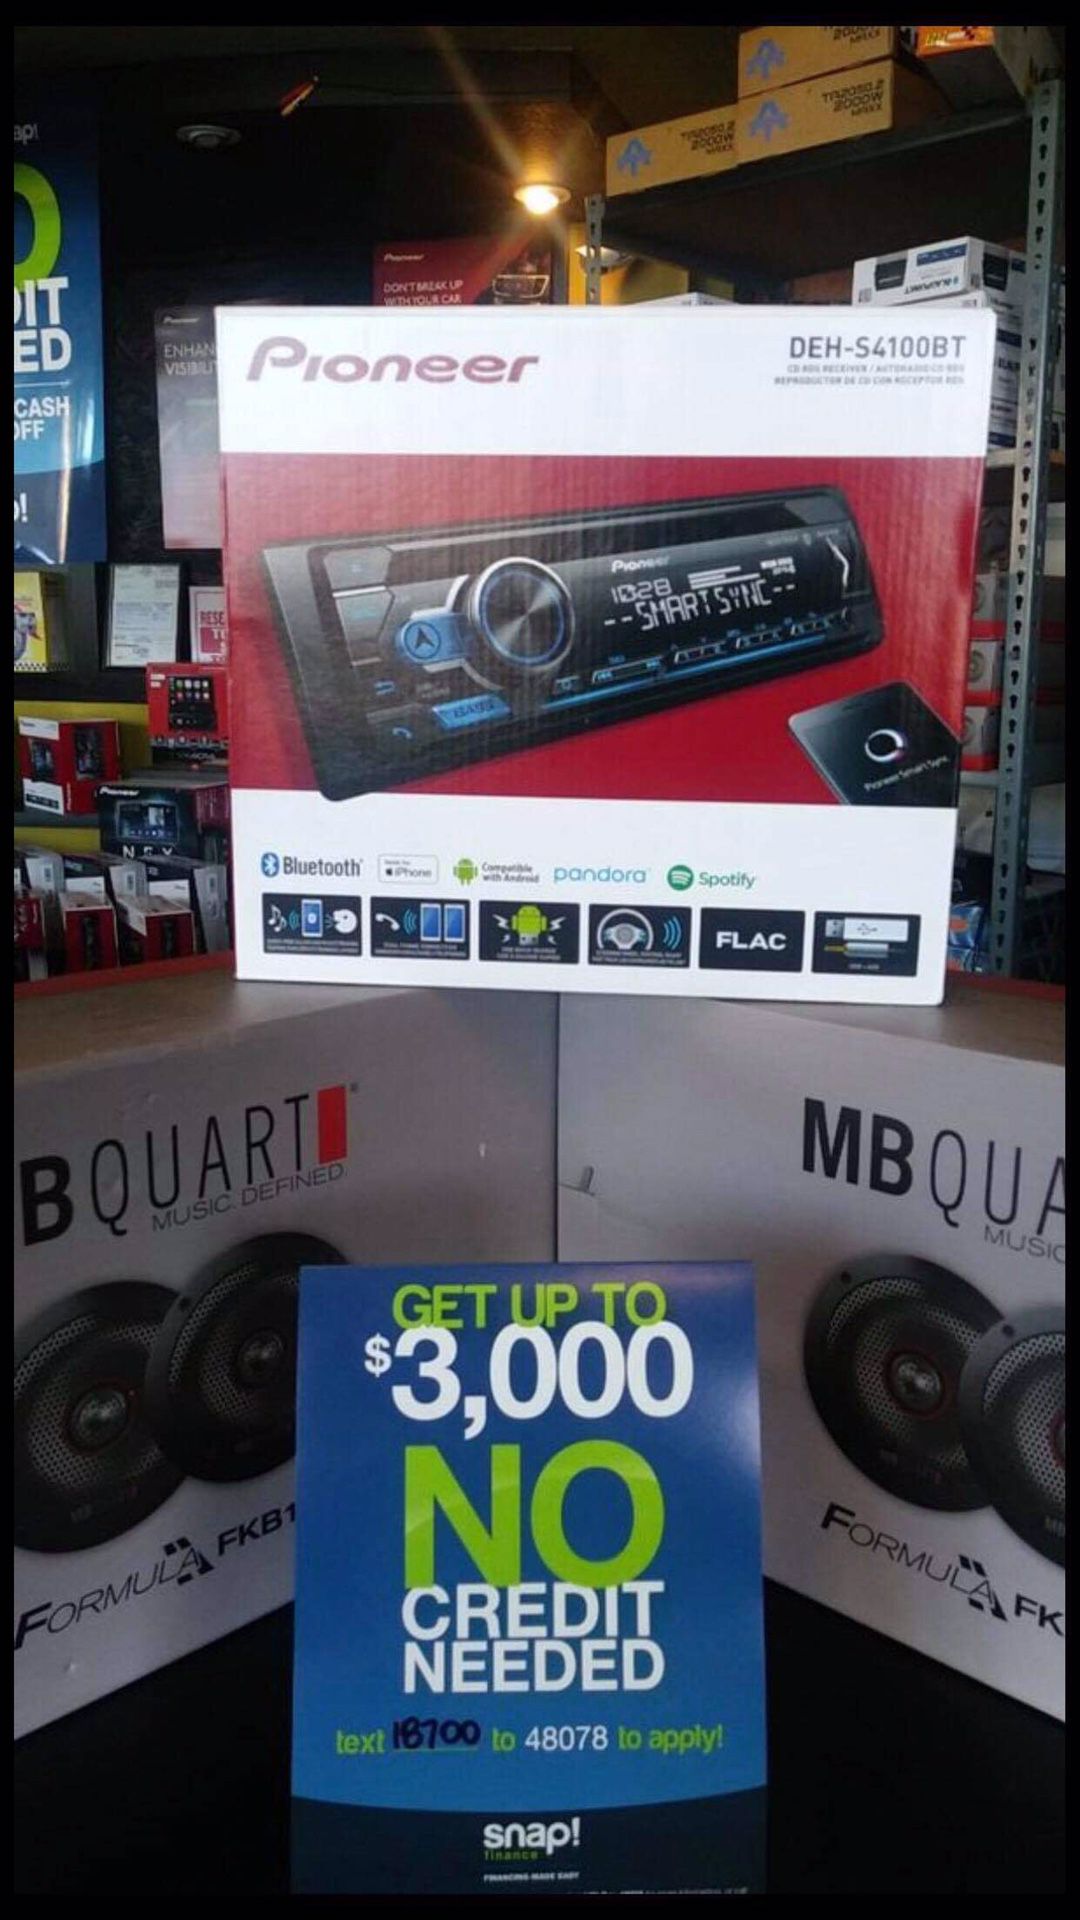 Pioneer Bluetooth stereo usb aux brand new with 4 sets of brand new mb quart speakers finance available